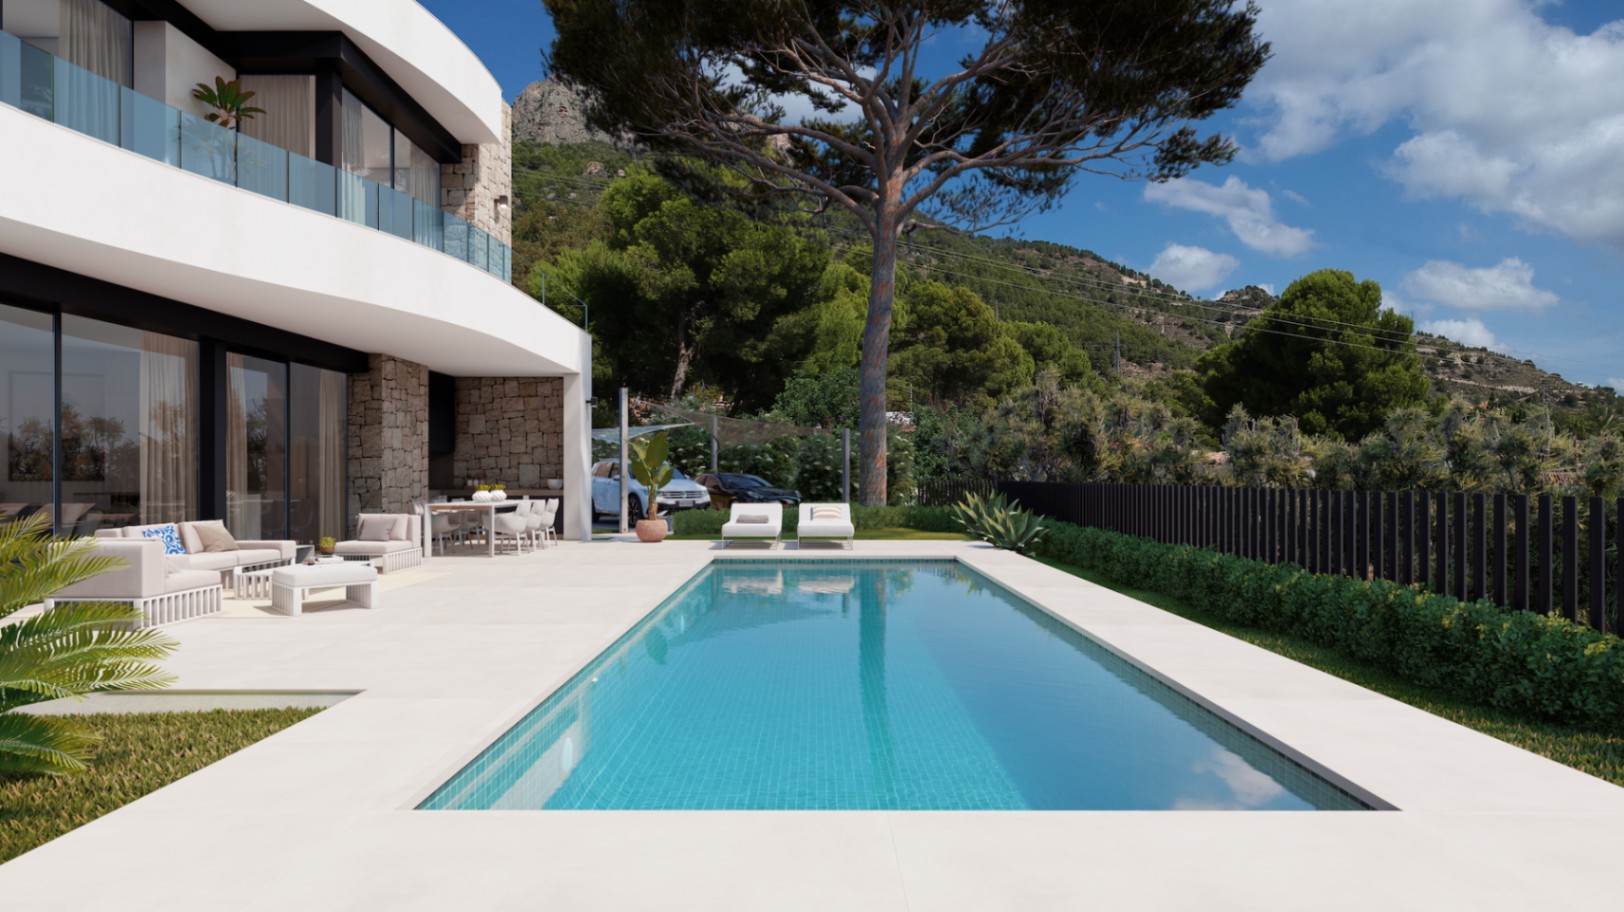 Project of a modern villa in Calpe